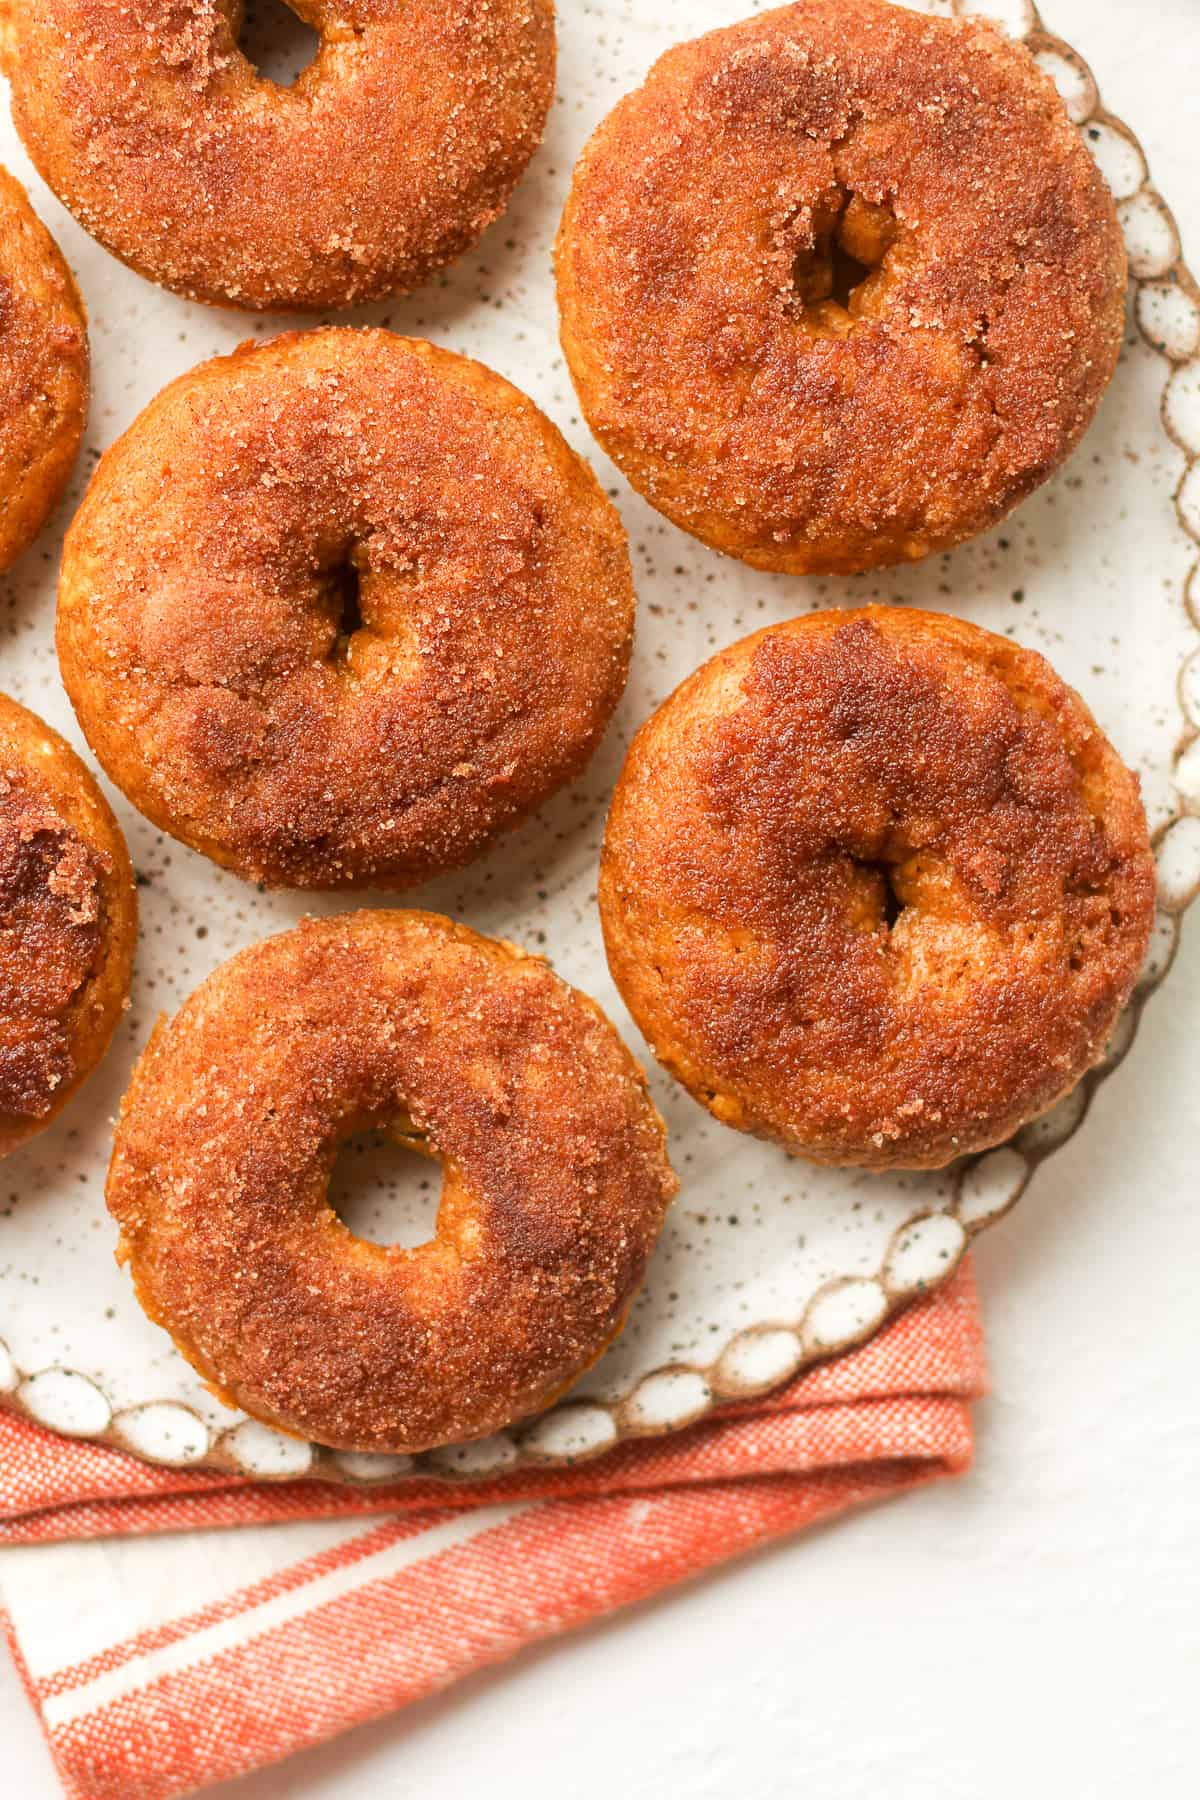 A plate of pumpkin spice donuts with cinnamon topping.